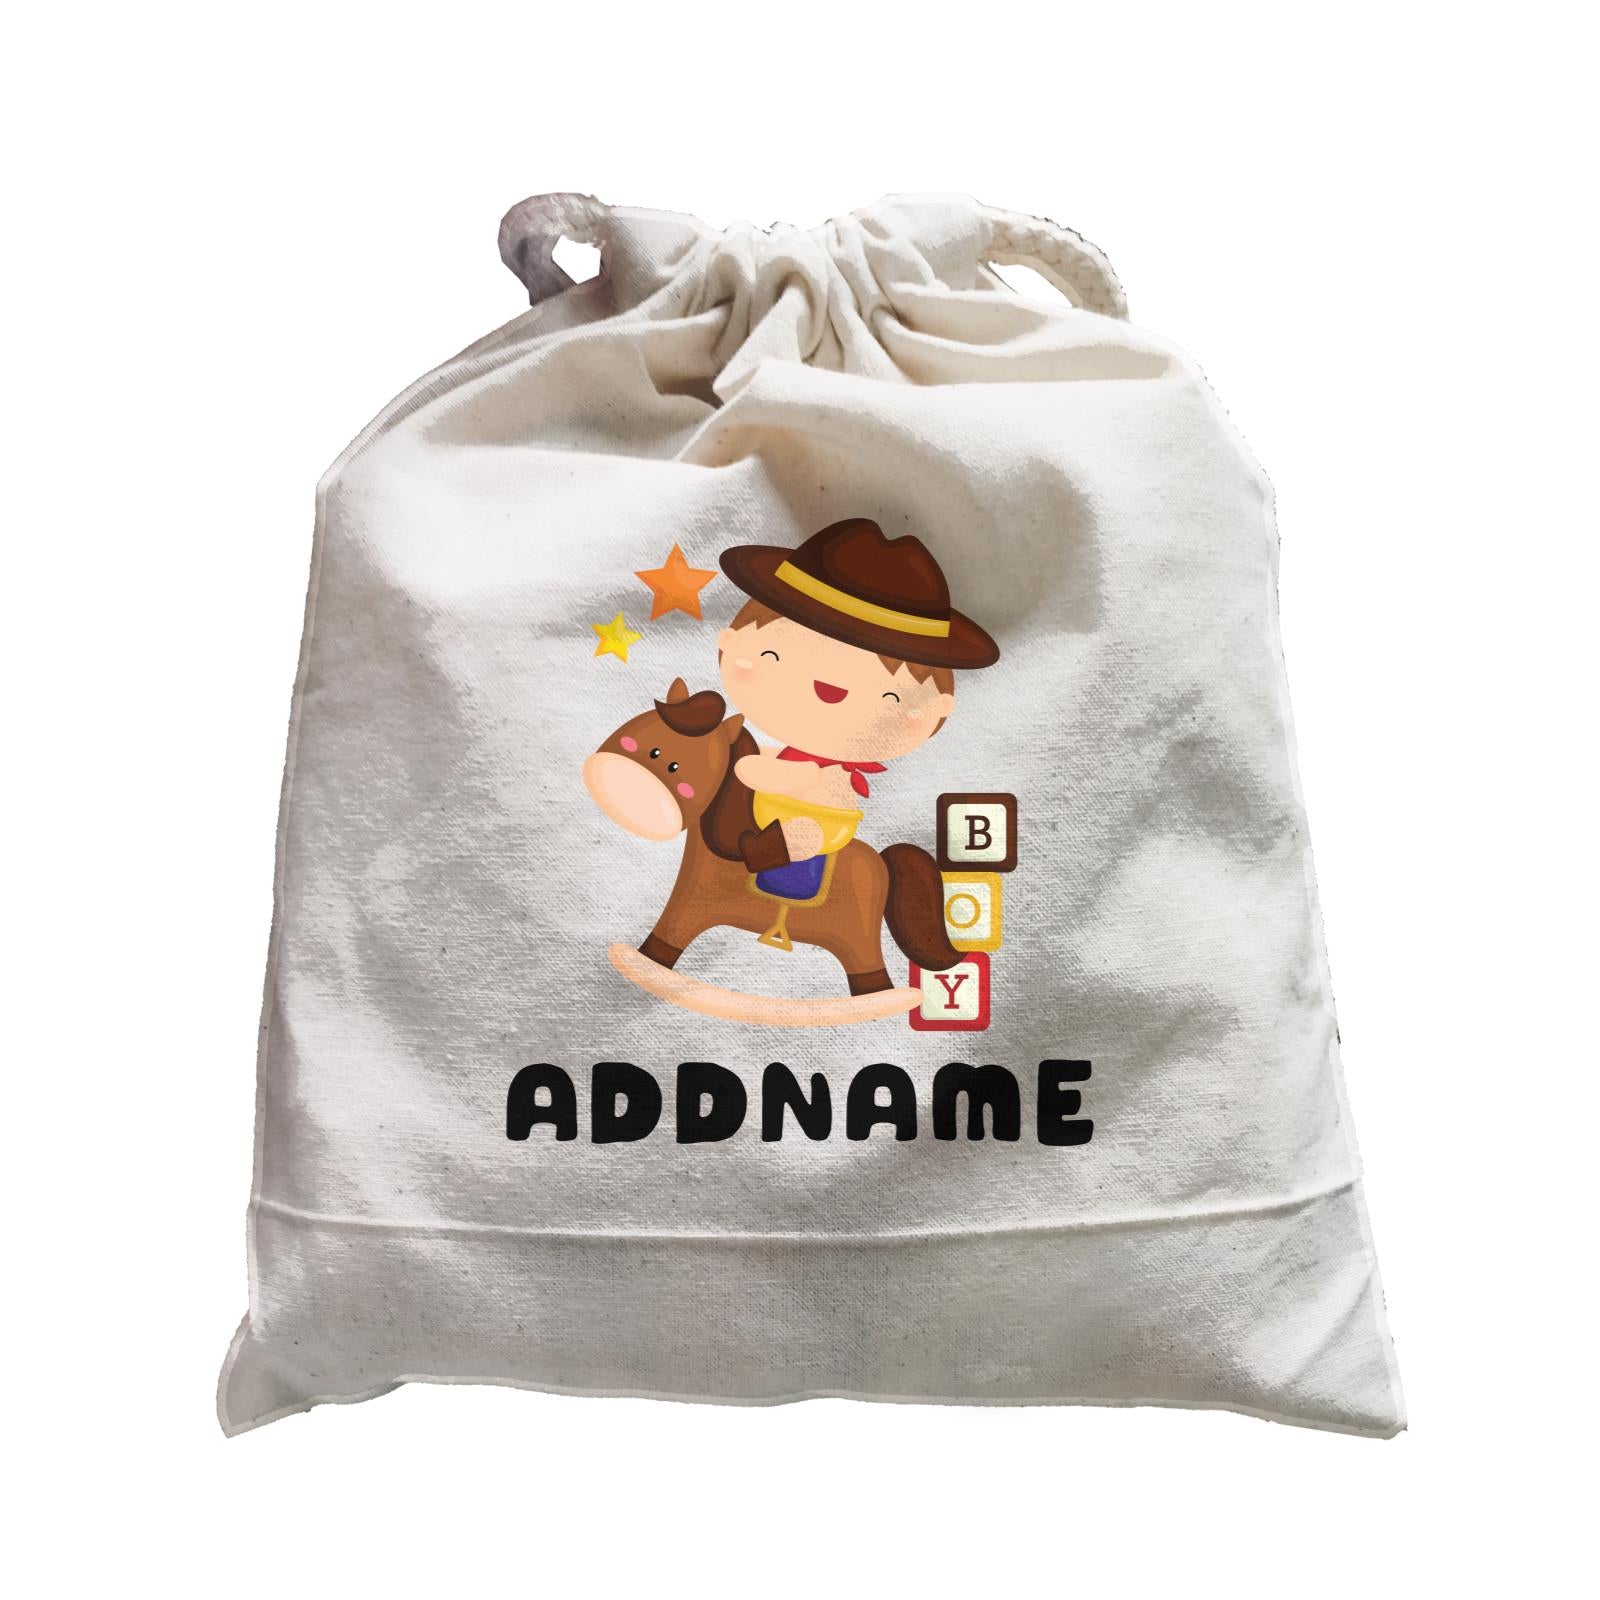 Birthday Cowboy Style Little Cowboy Playing Toy Horse Addname Satchel